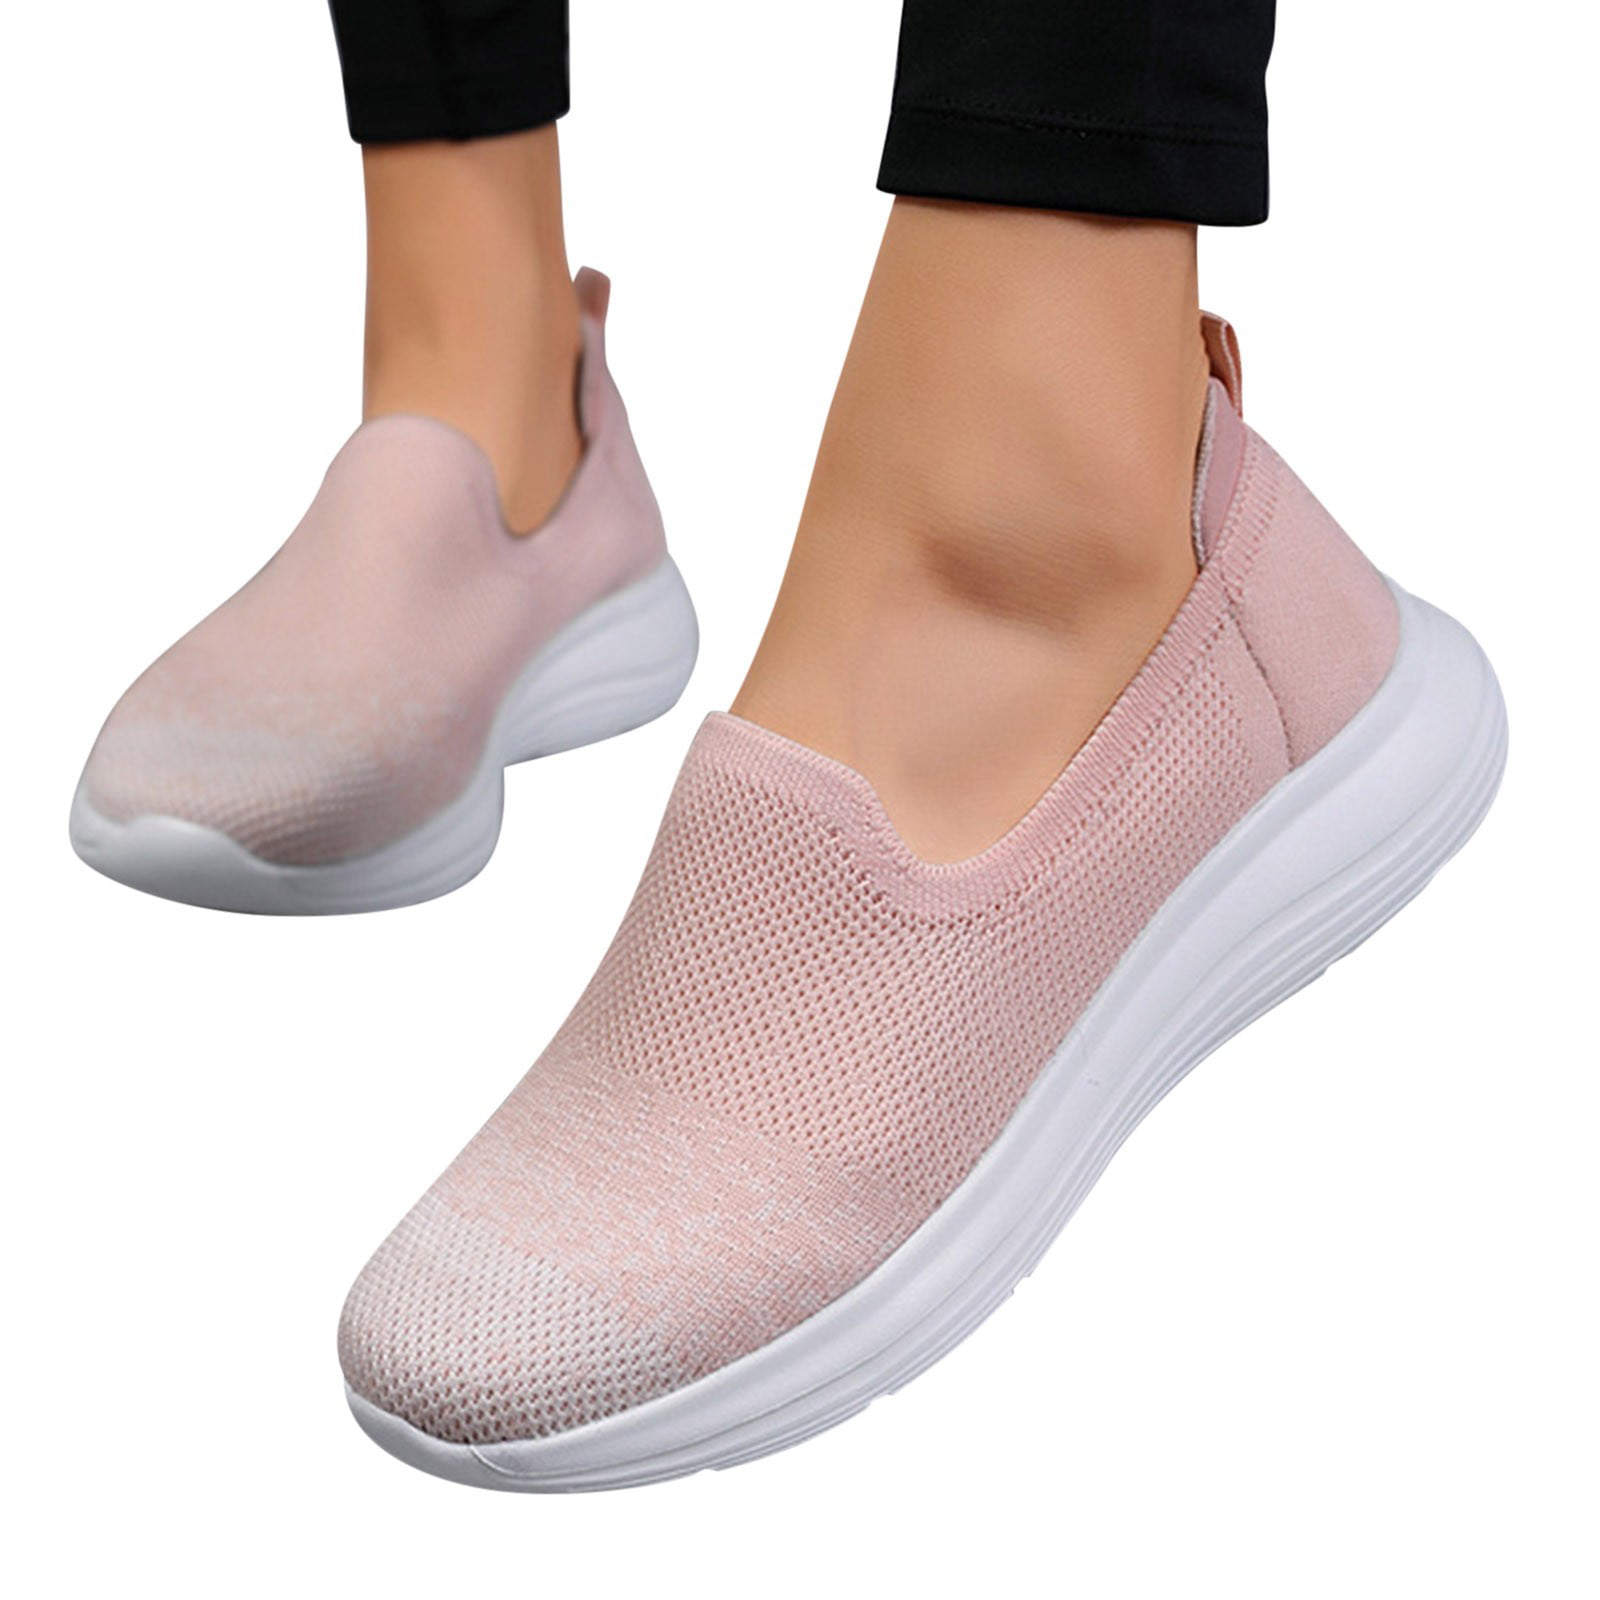 Pastor fluctuar mano eczipvz Women'S Fashion Sneakers Womens Running Shoes Athletic Slip On  Walking Comfort Sneakers Breathable Casual Loafers - Walmart.com